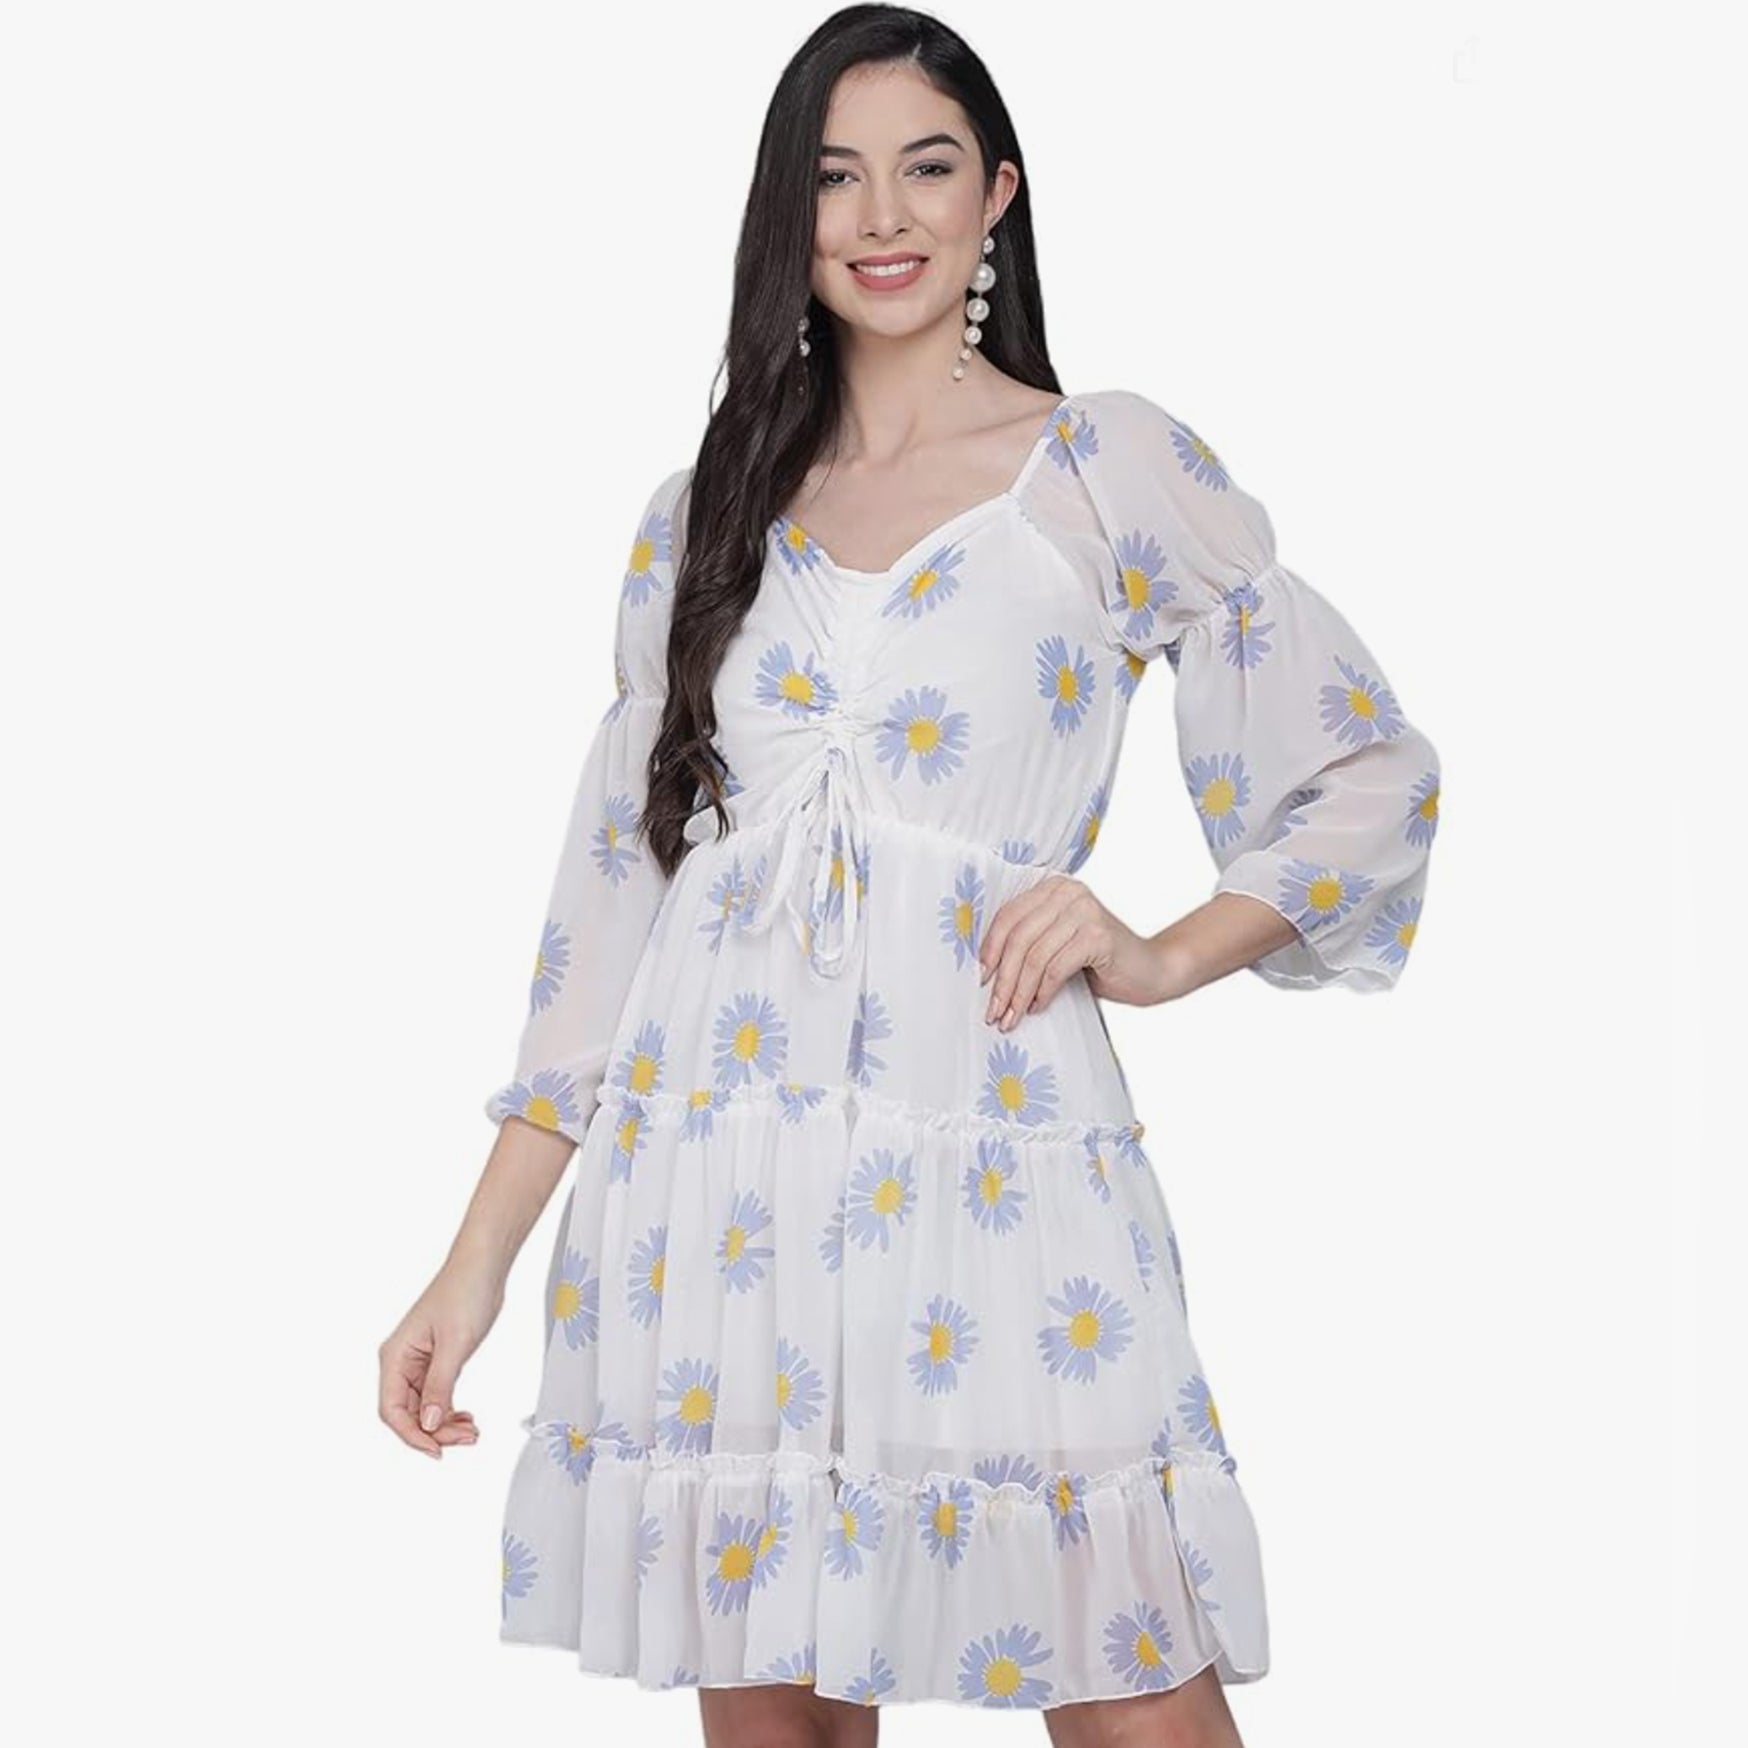 FUNDAY FASHION Women Fit and Flare Floral Printed Dress (Medium, White,Blue)